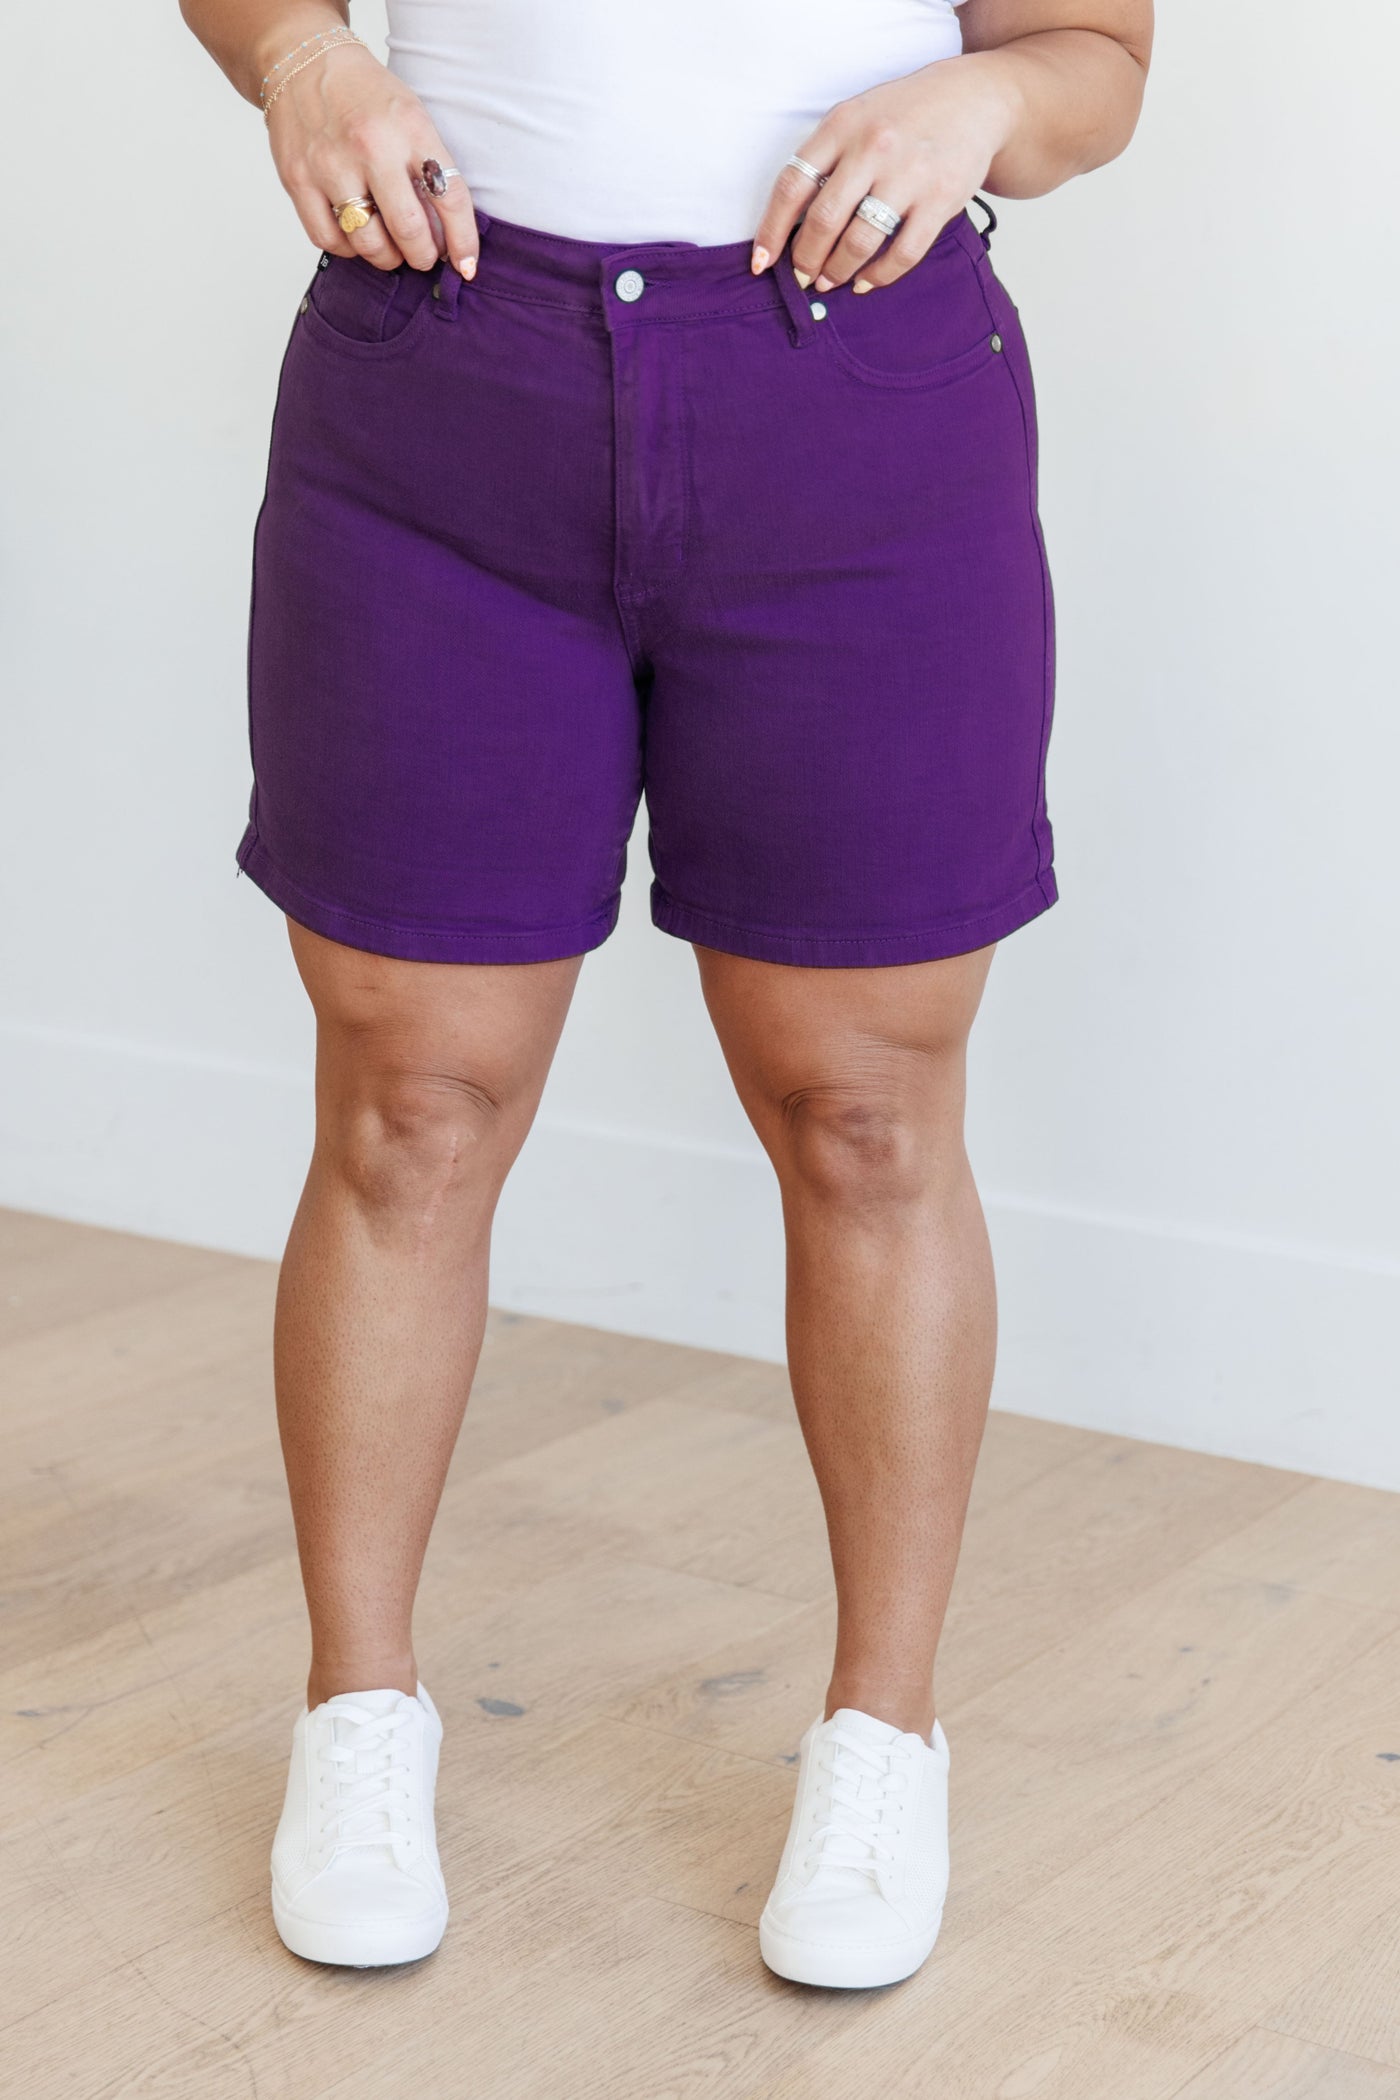 Judy Blue Jenna High Rise Control Top Cuffed Shorts in Purple Womens Southern Soul Collectives